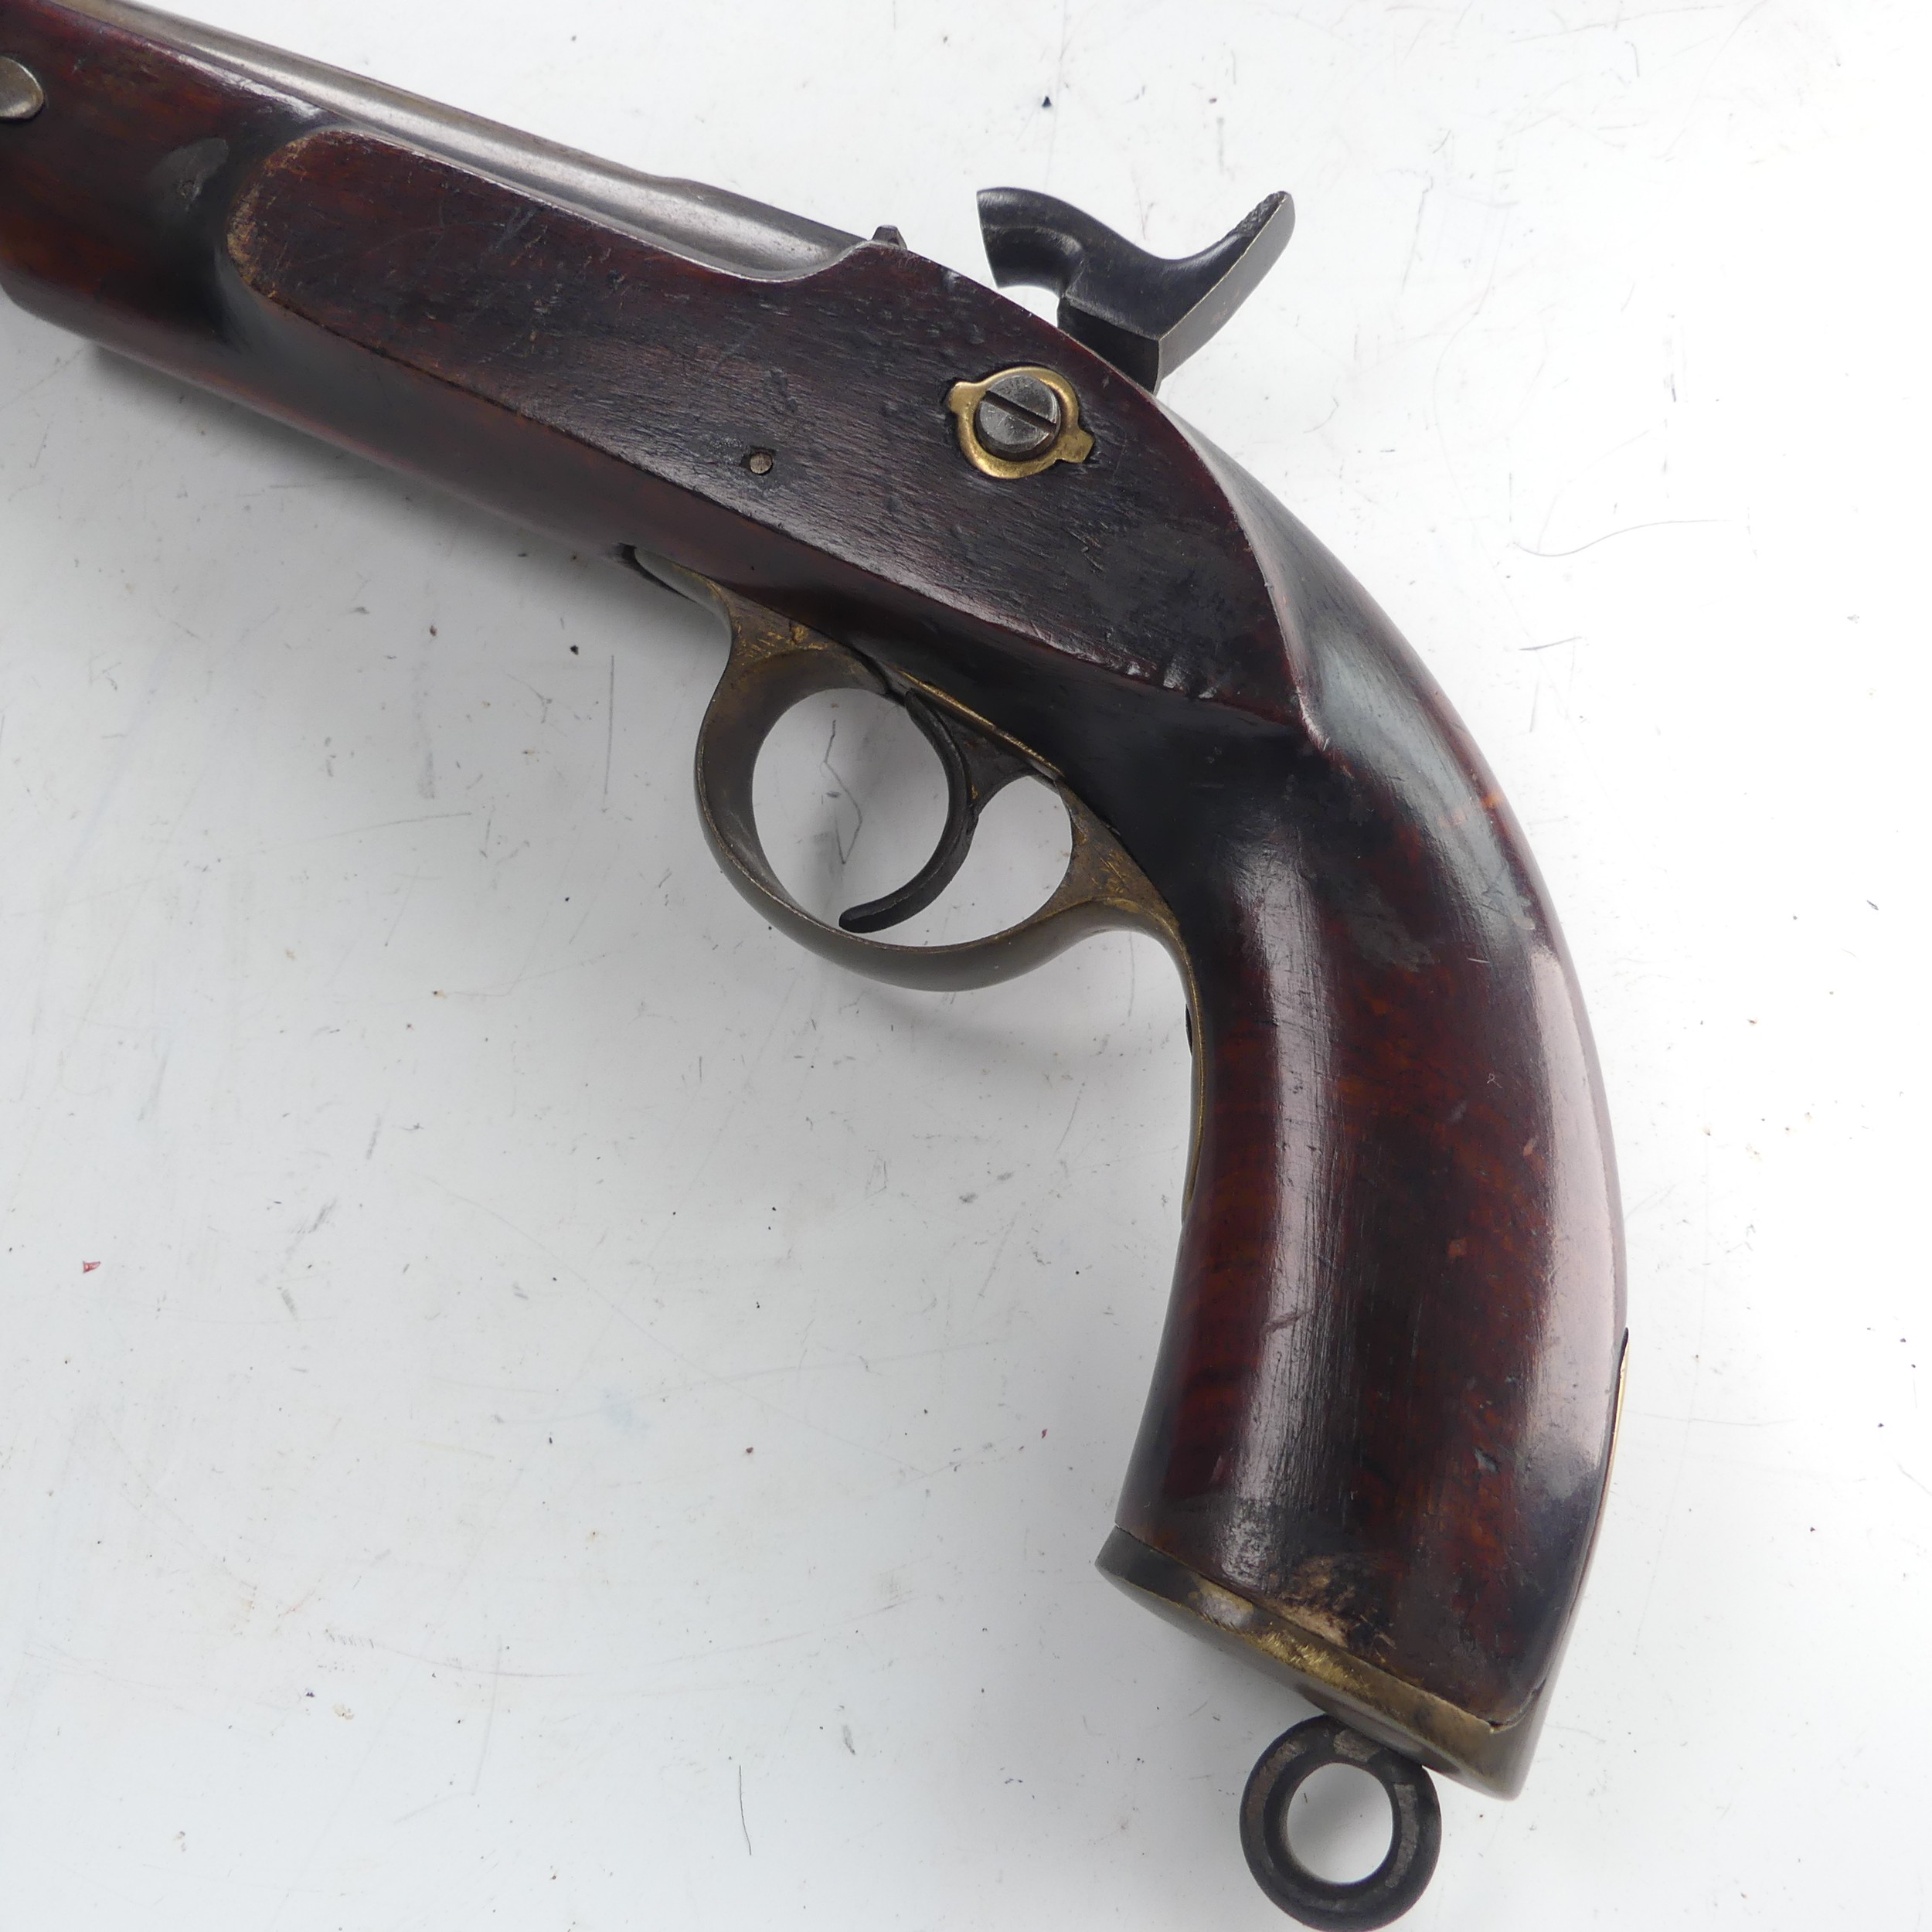 A 19th century 'Enfield' percussion cap service Pistol, with walnut stock, 8 inch steel barrel, - Image 5 of 5